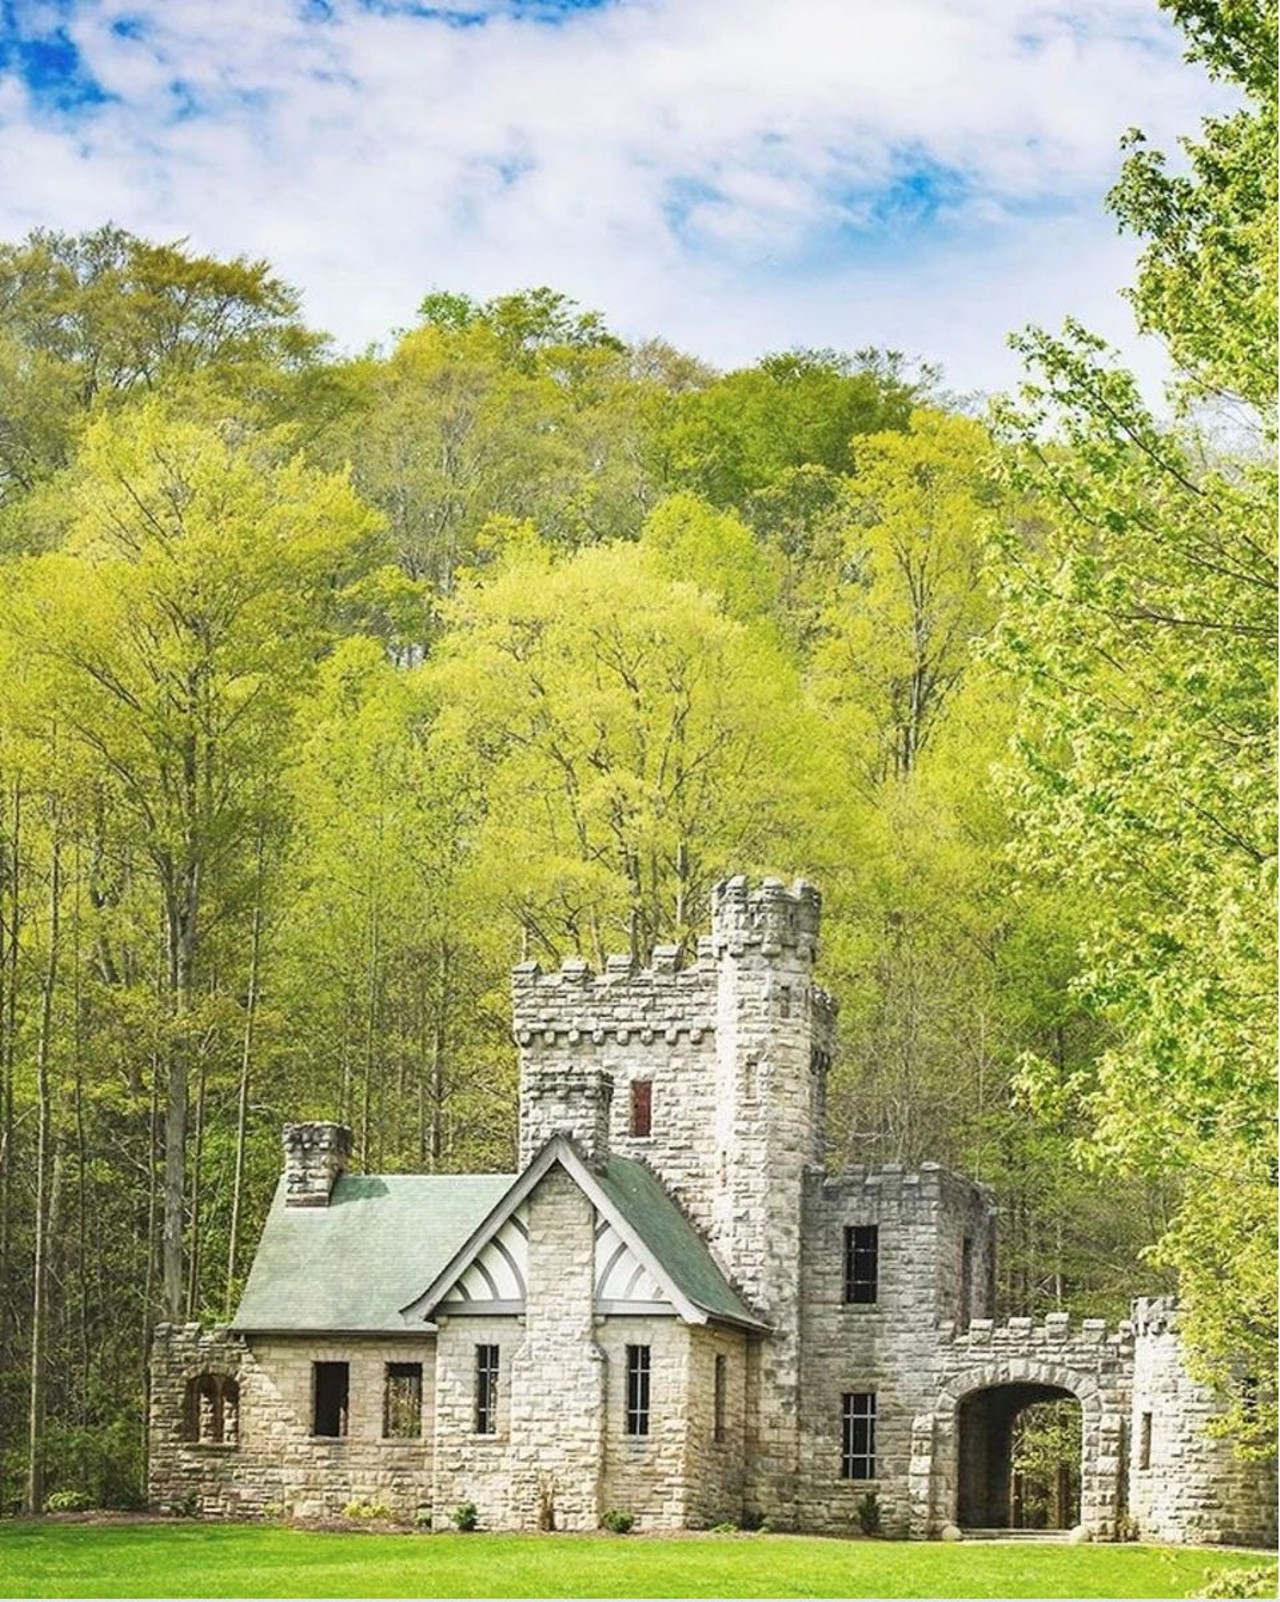 Squire&#146;s Castle
216-635-3200, River Rd., Willoughby Hills
Yes, you can find a castle in one of our Metroparks. Allegedly, sometimes late at night, you can even catch a glimpse of Mrs. Squire, who supposedly died in the castle.
Photo via bestpicsofcleveland/Instagram